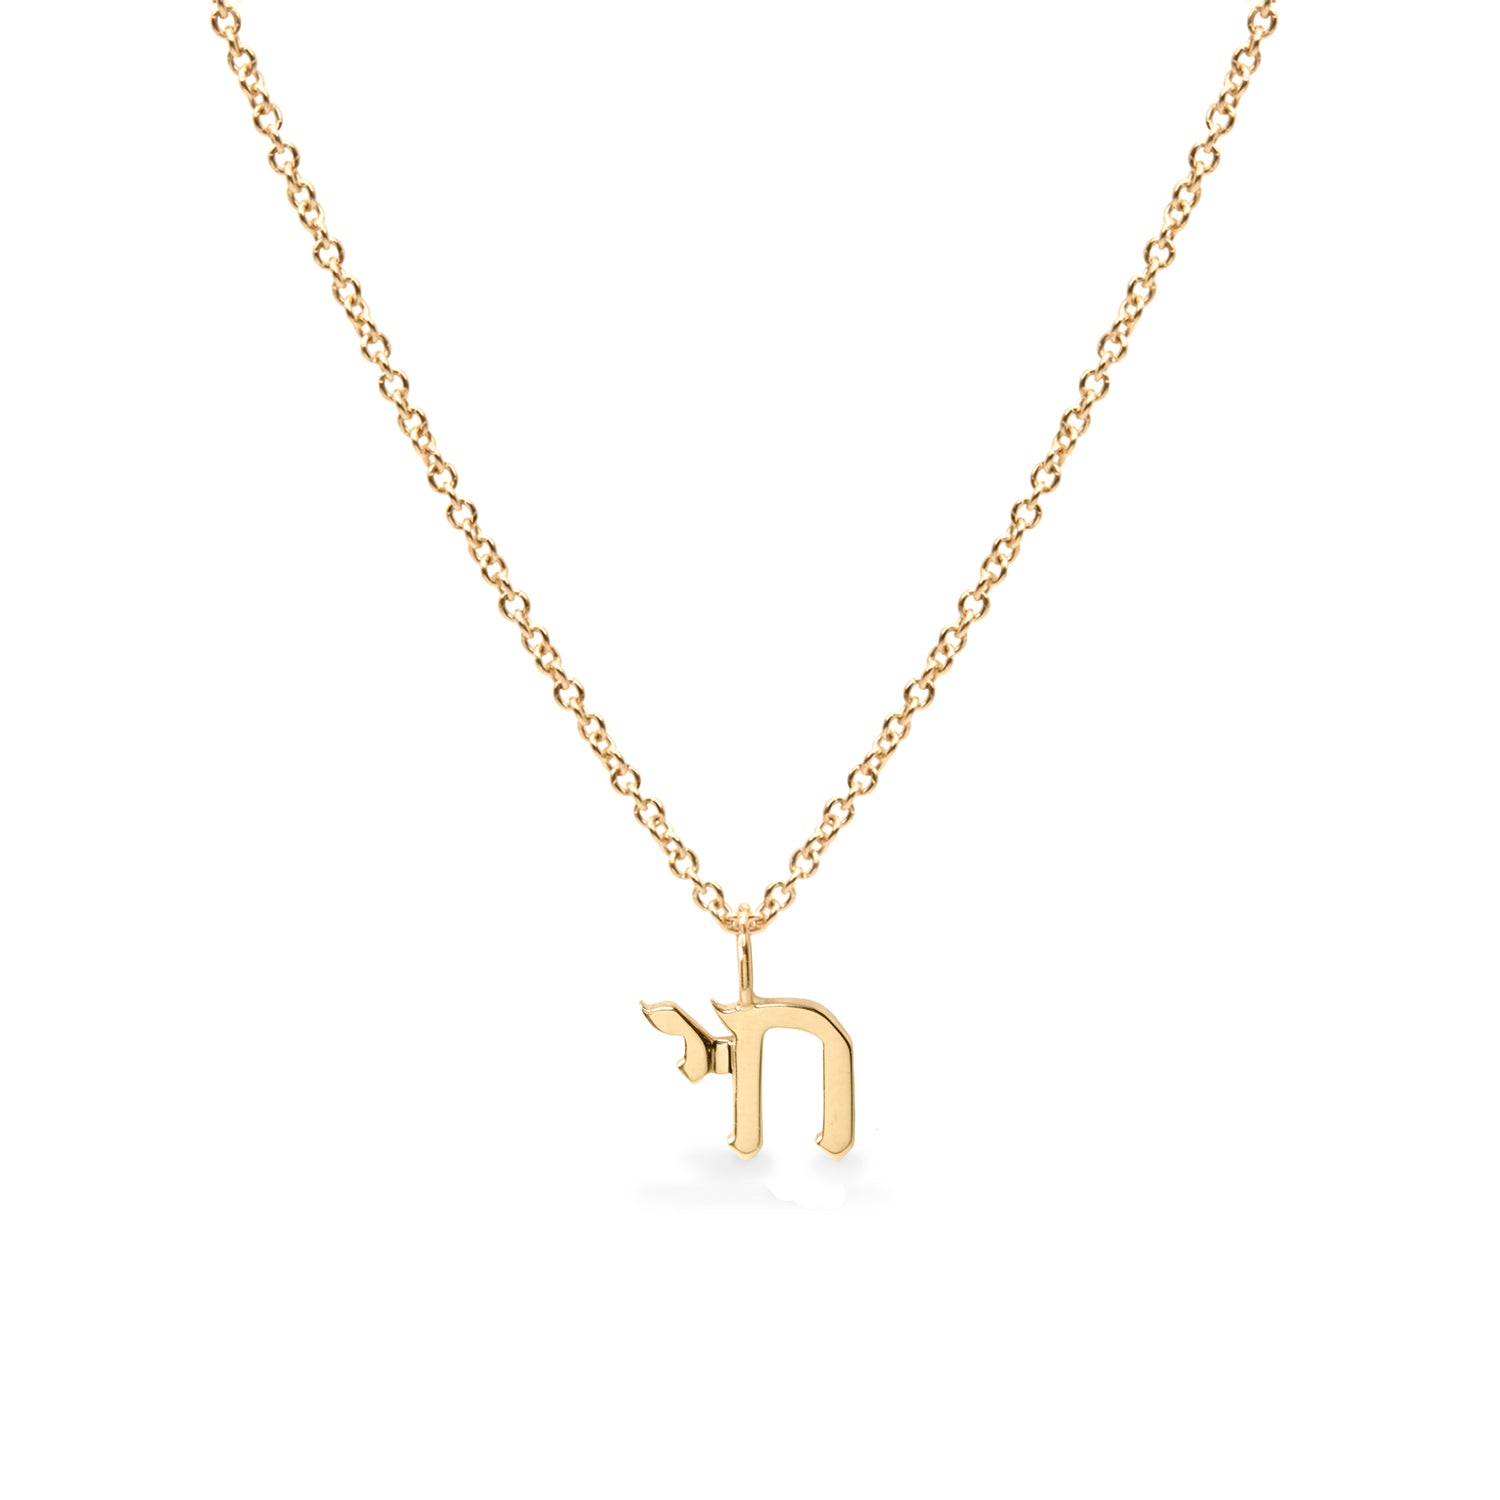 chai necklace in solid gold - חי